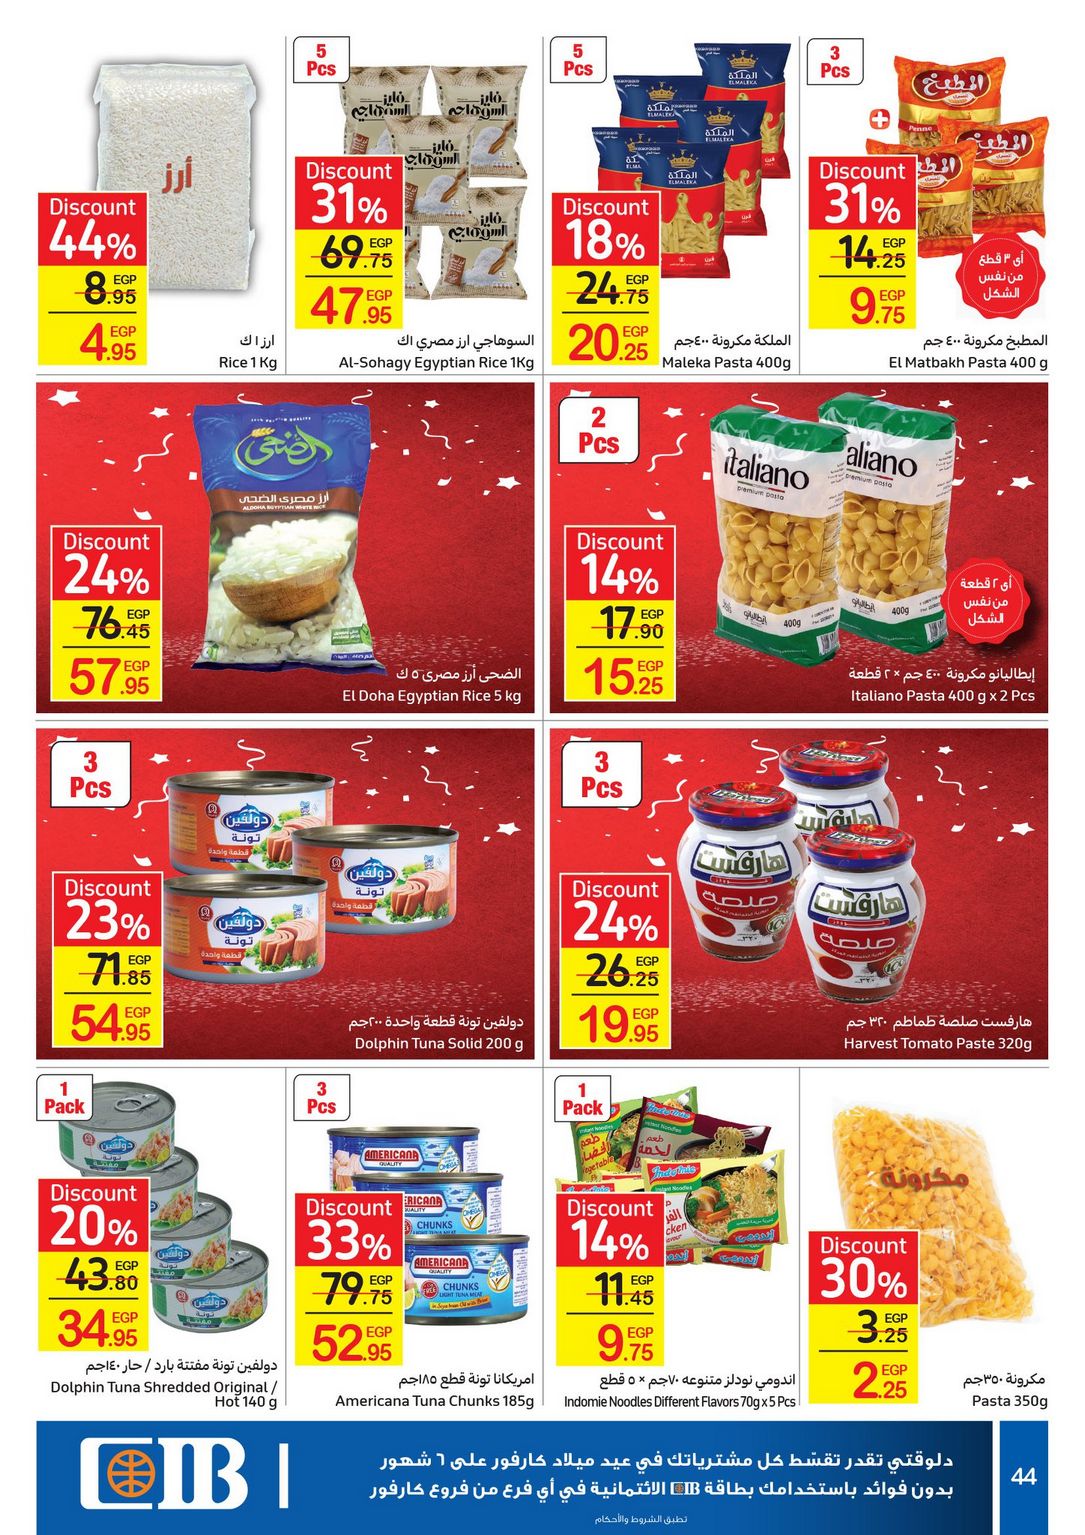 Carrefour Anniversary Offers till 18/2/2021 | Carrefour Egypt 46